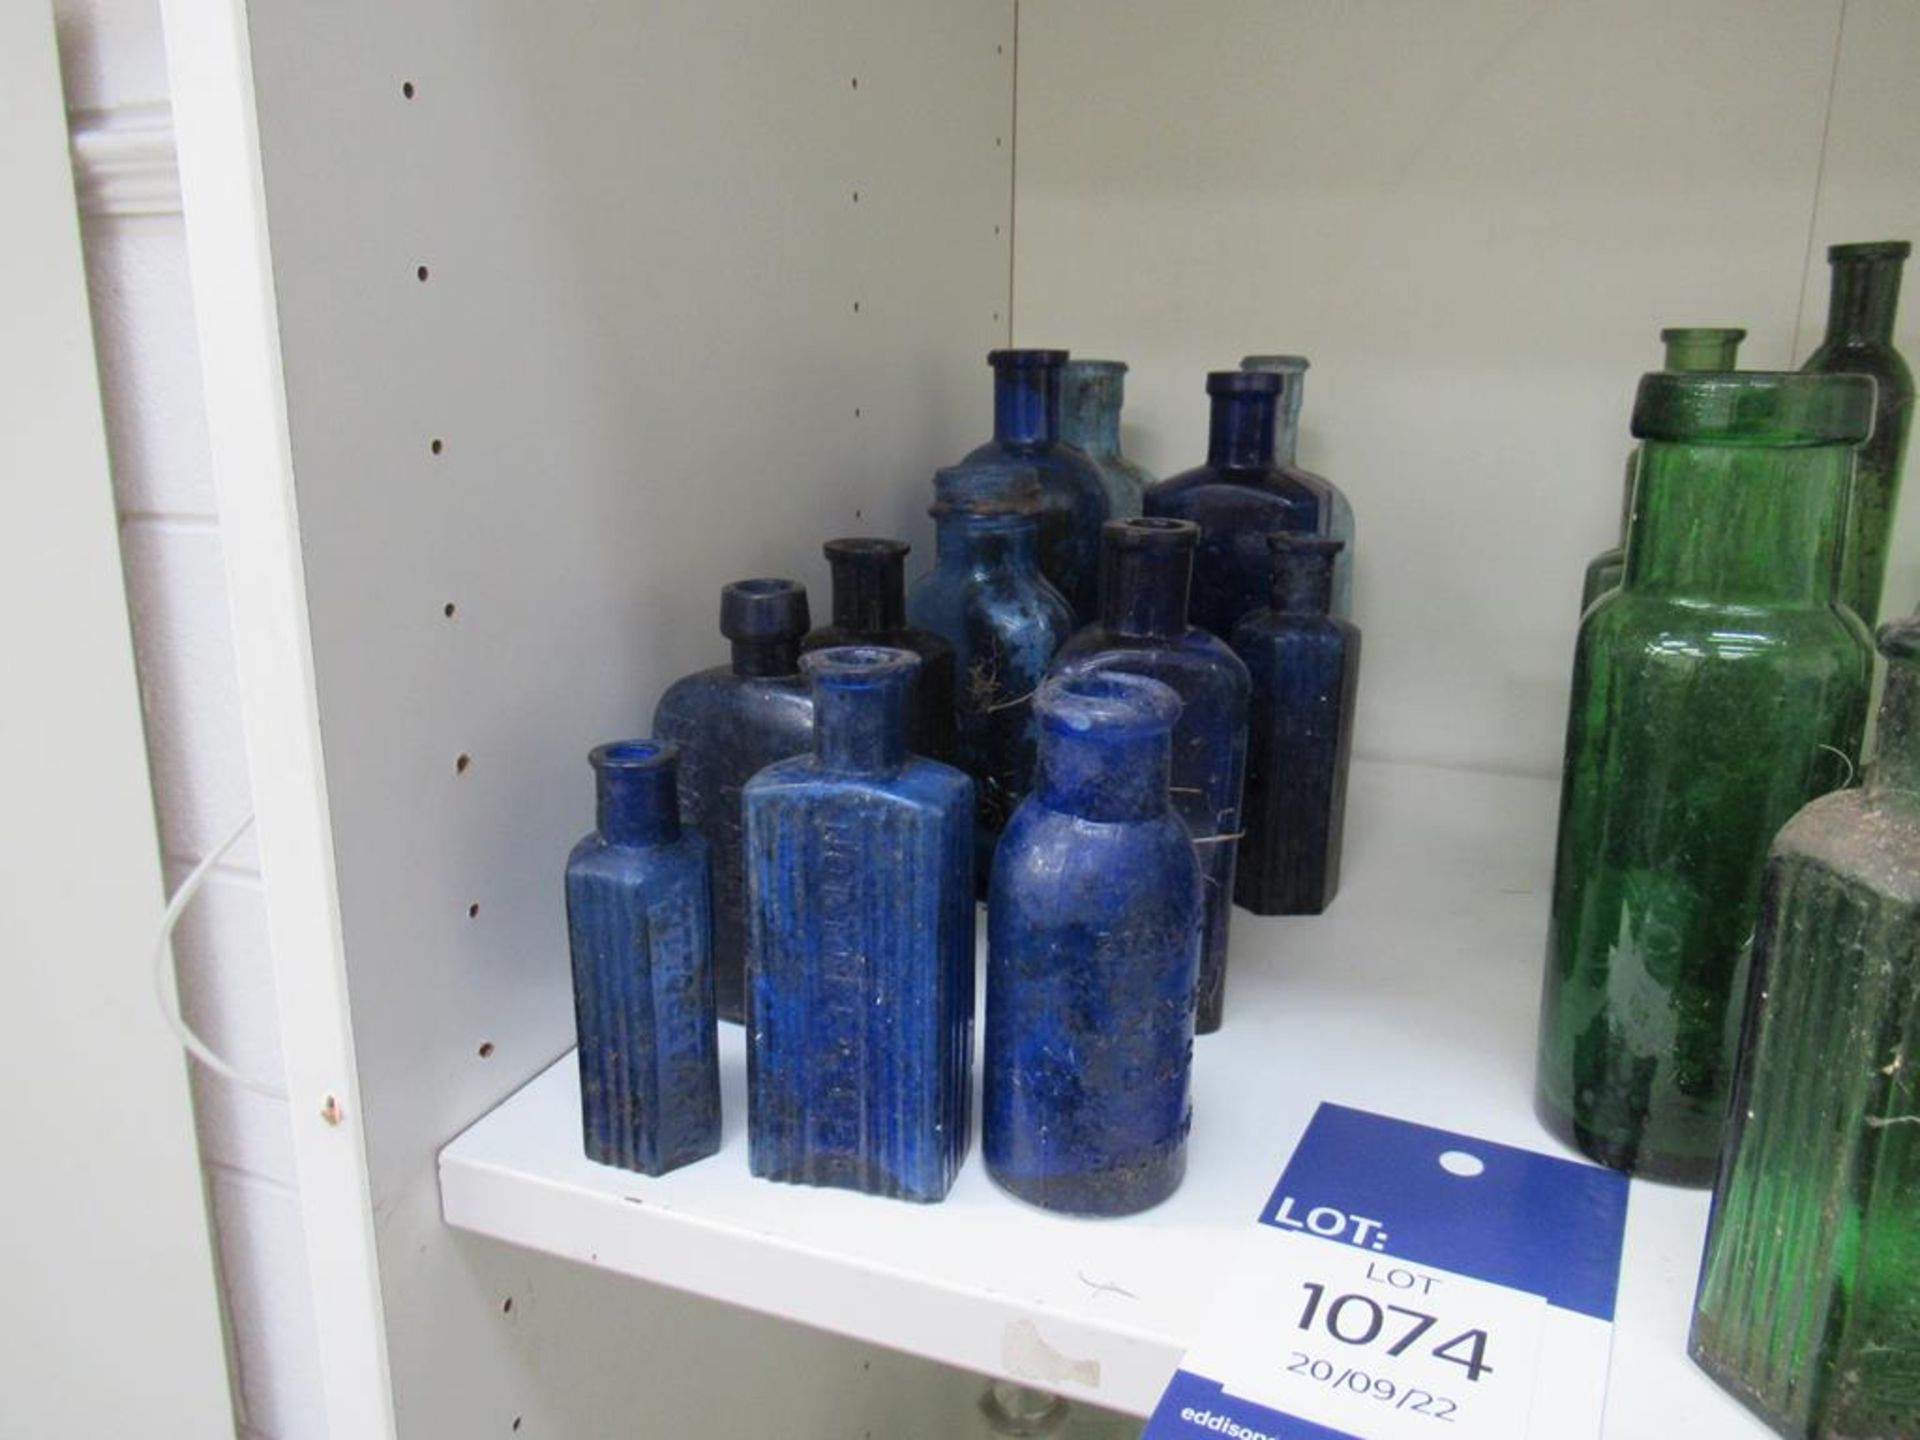 Shelf of Assorted Cobalt Green and Amber Bottles - many saying 'not to be taken' - Image 2 of 4